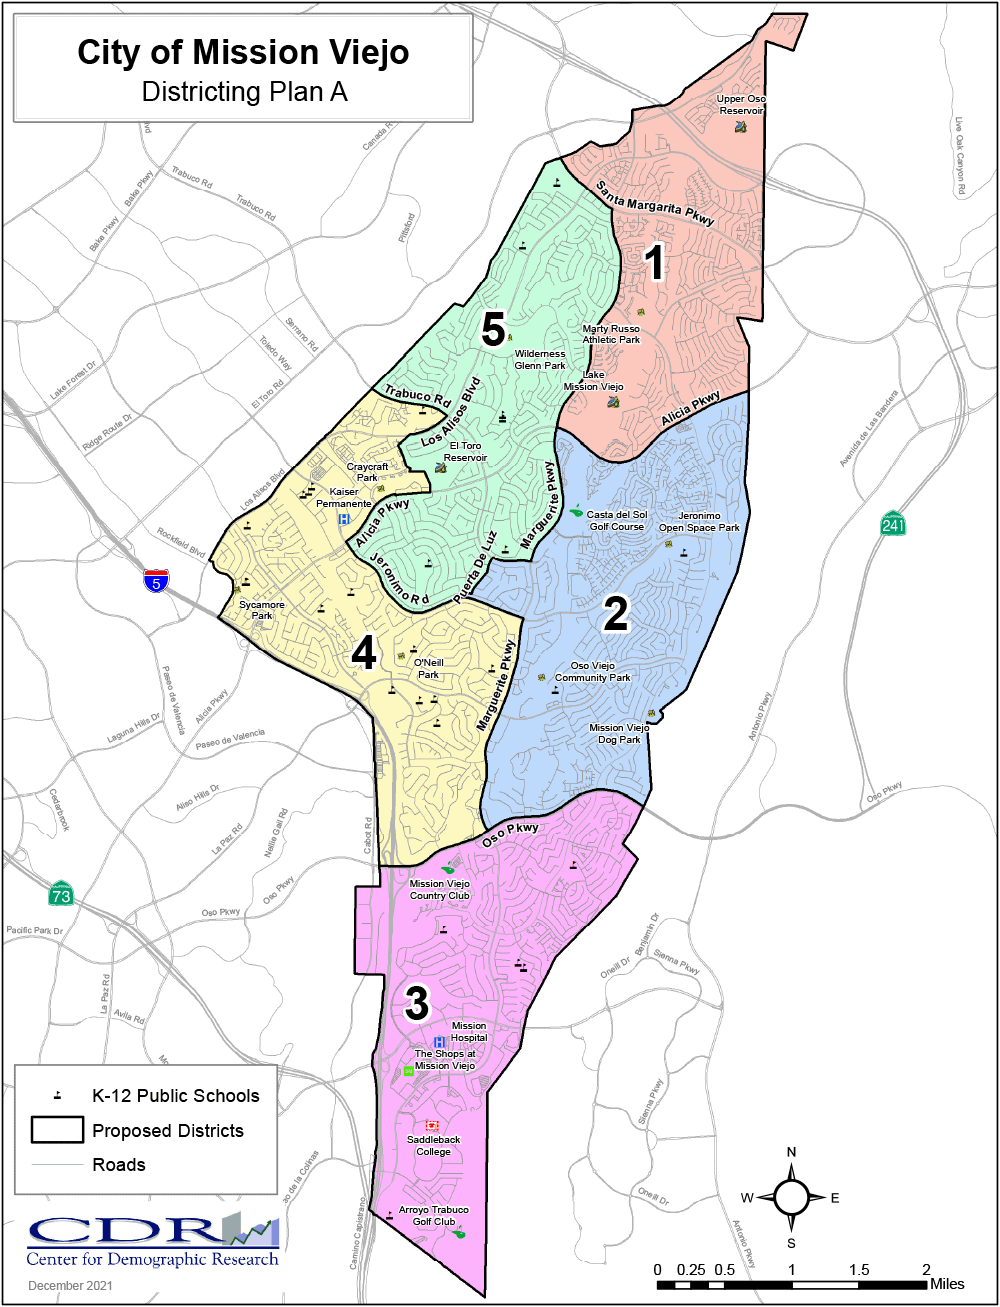 City of Mission Viejo Districting Plan A map